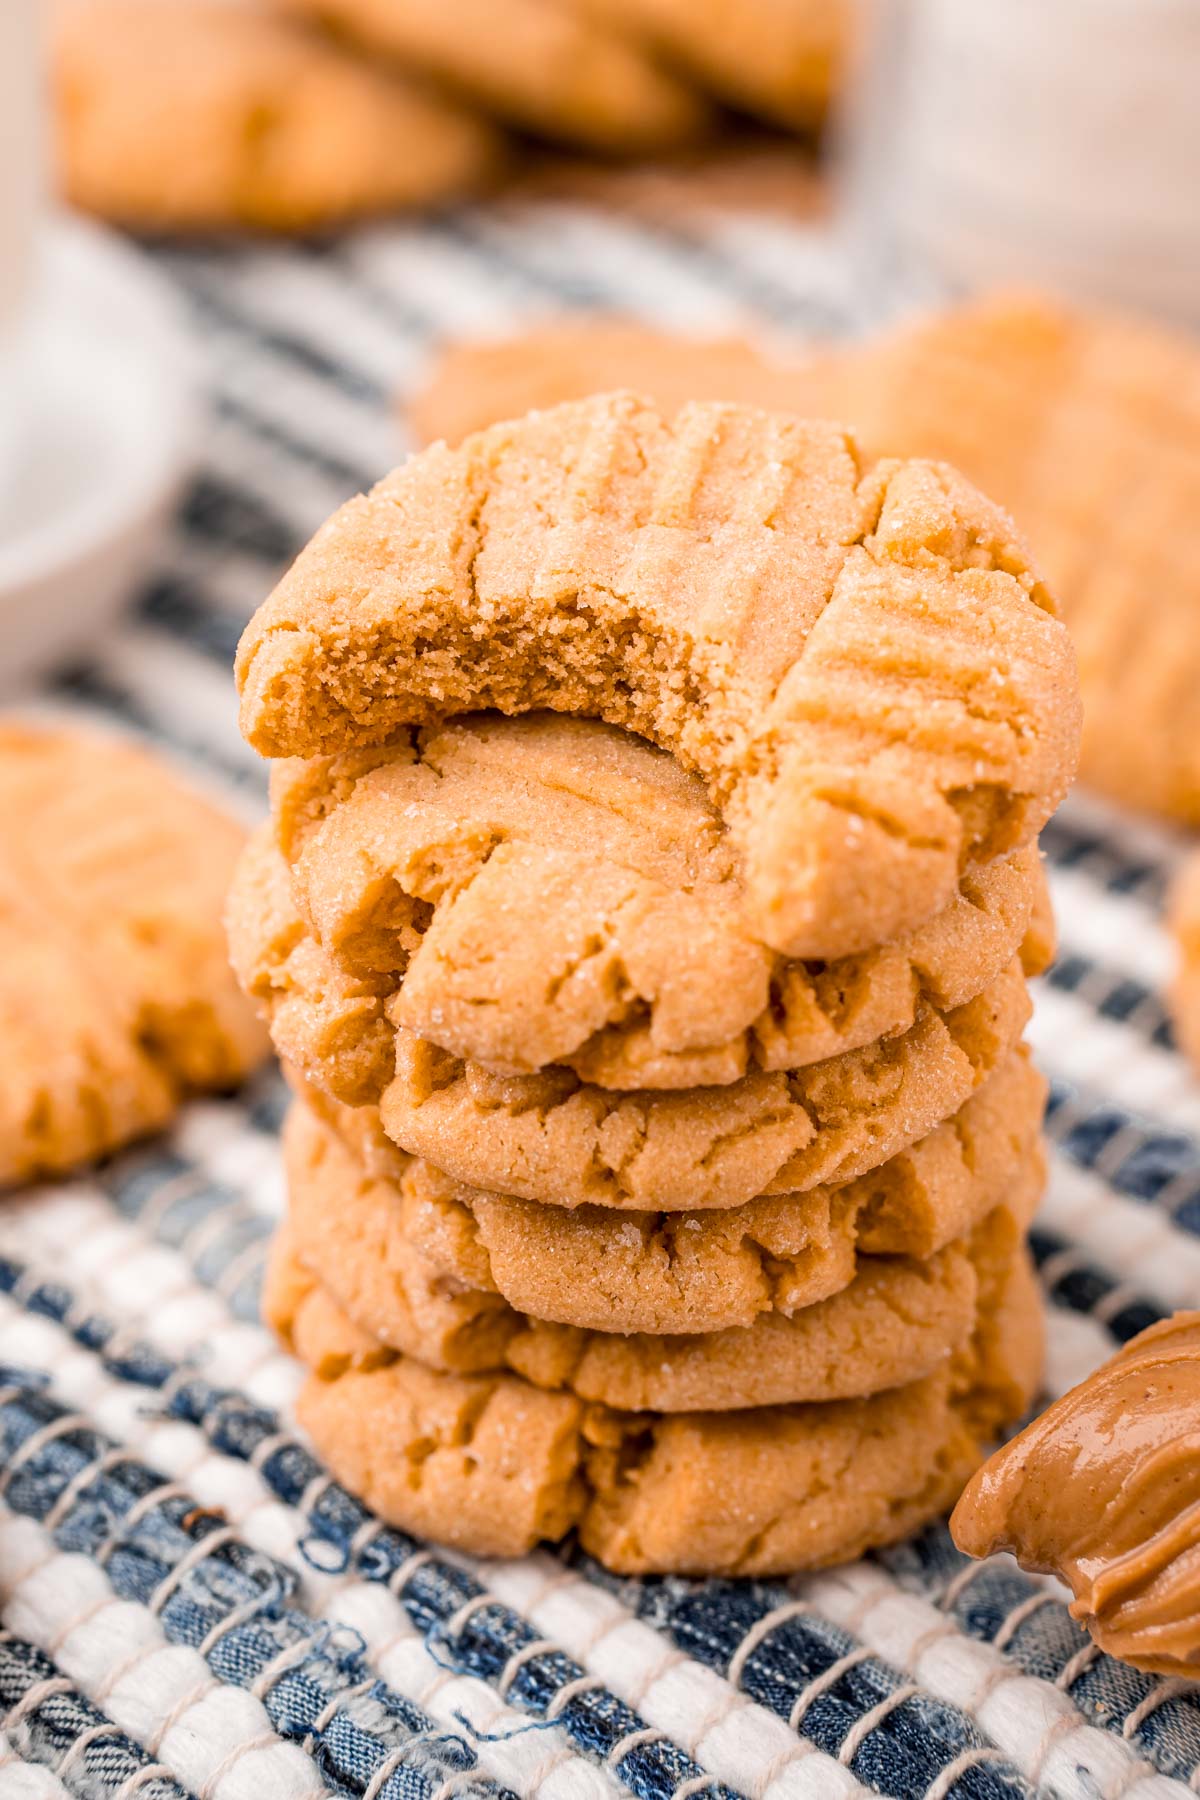 Close up photo of peanut butter cookies stacked on a striped napkin.